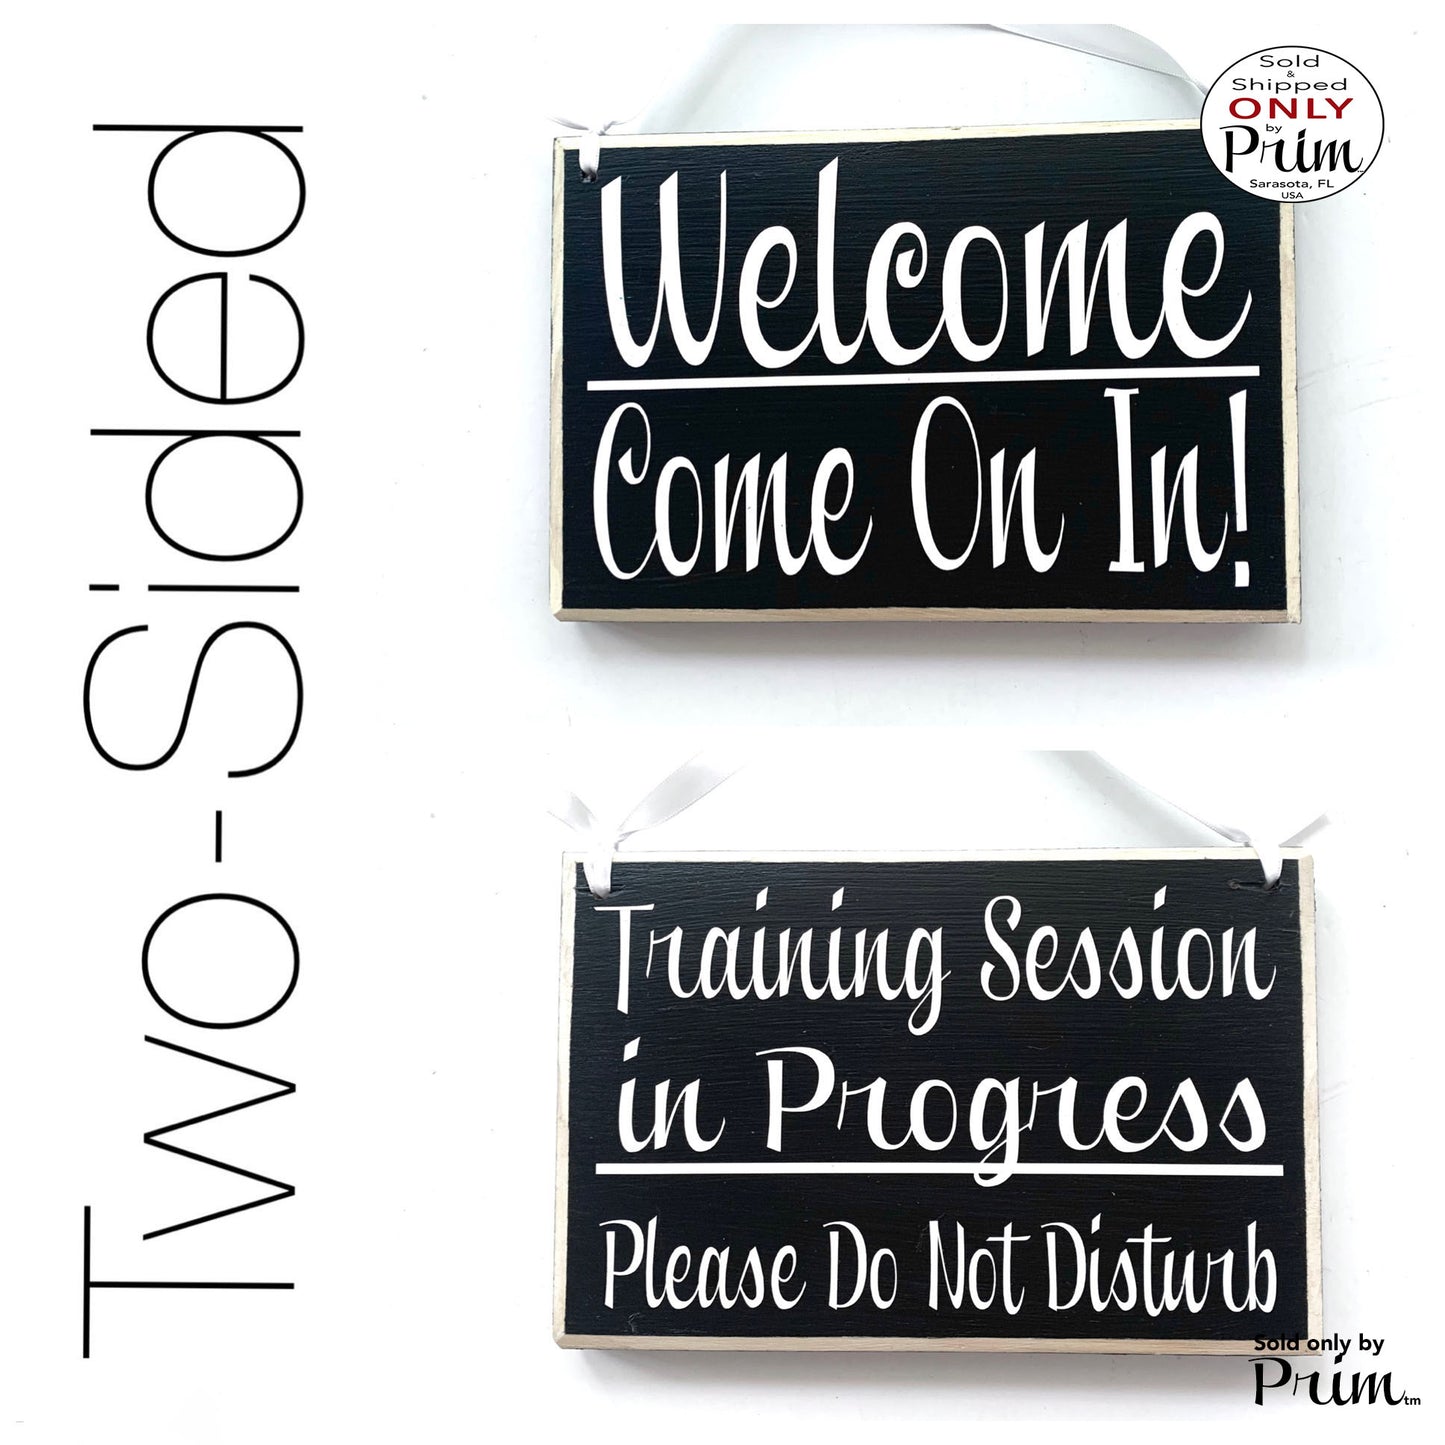 8x6 Welcome Come On In Training Session In Progress Please Do Not Disturb Custom Wood Sign Office Teacher School Testing Door Plaque Designs by Prim 